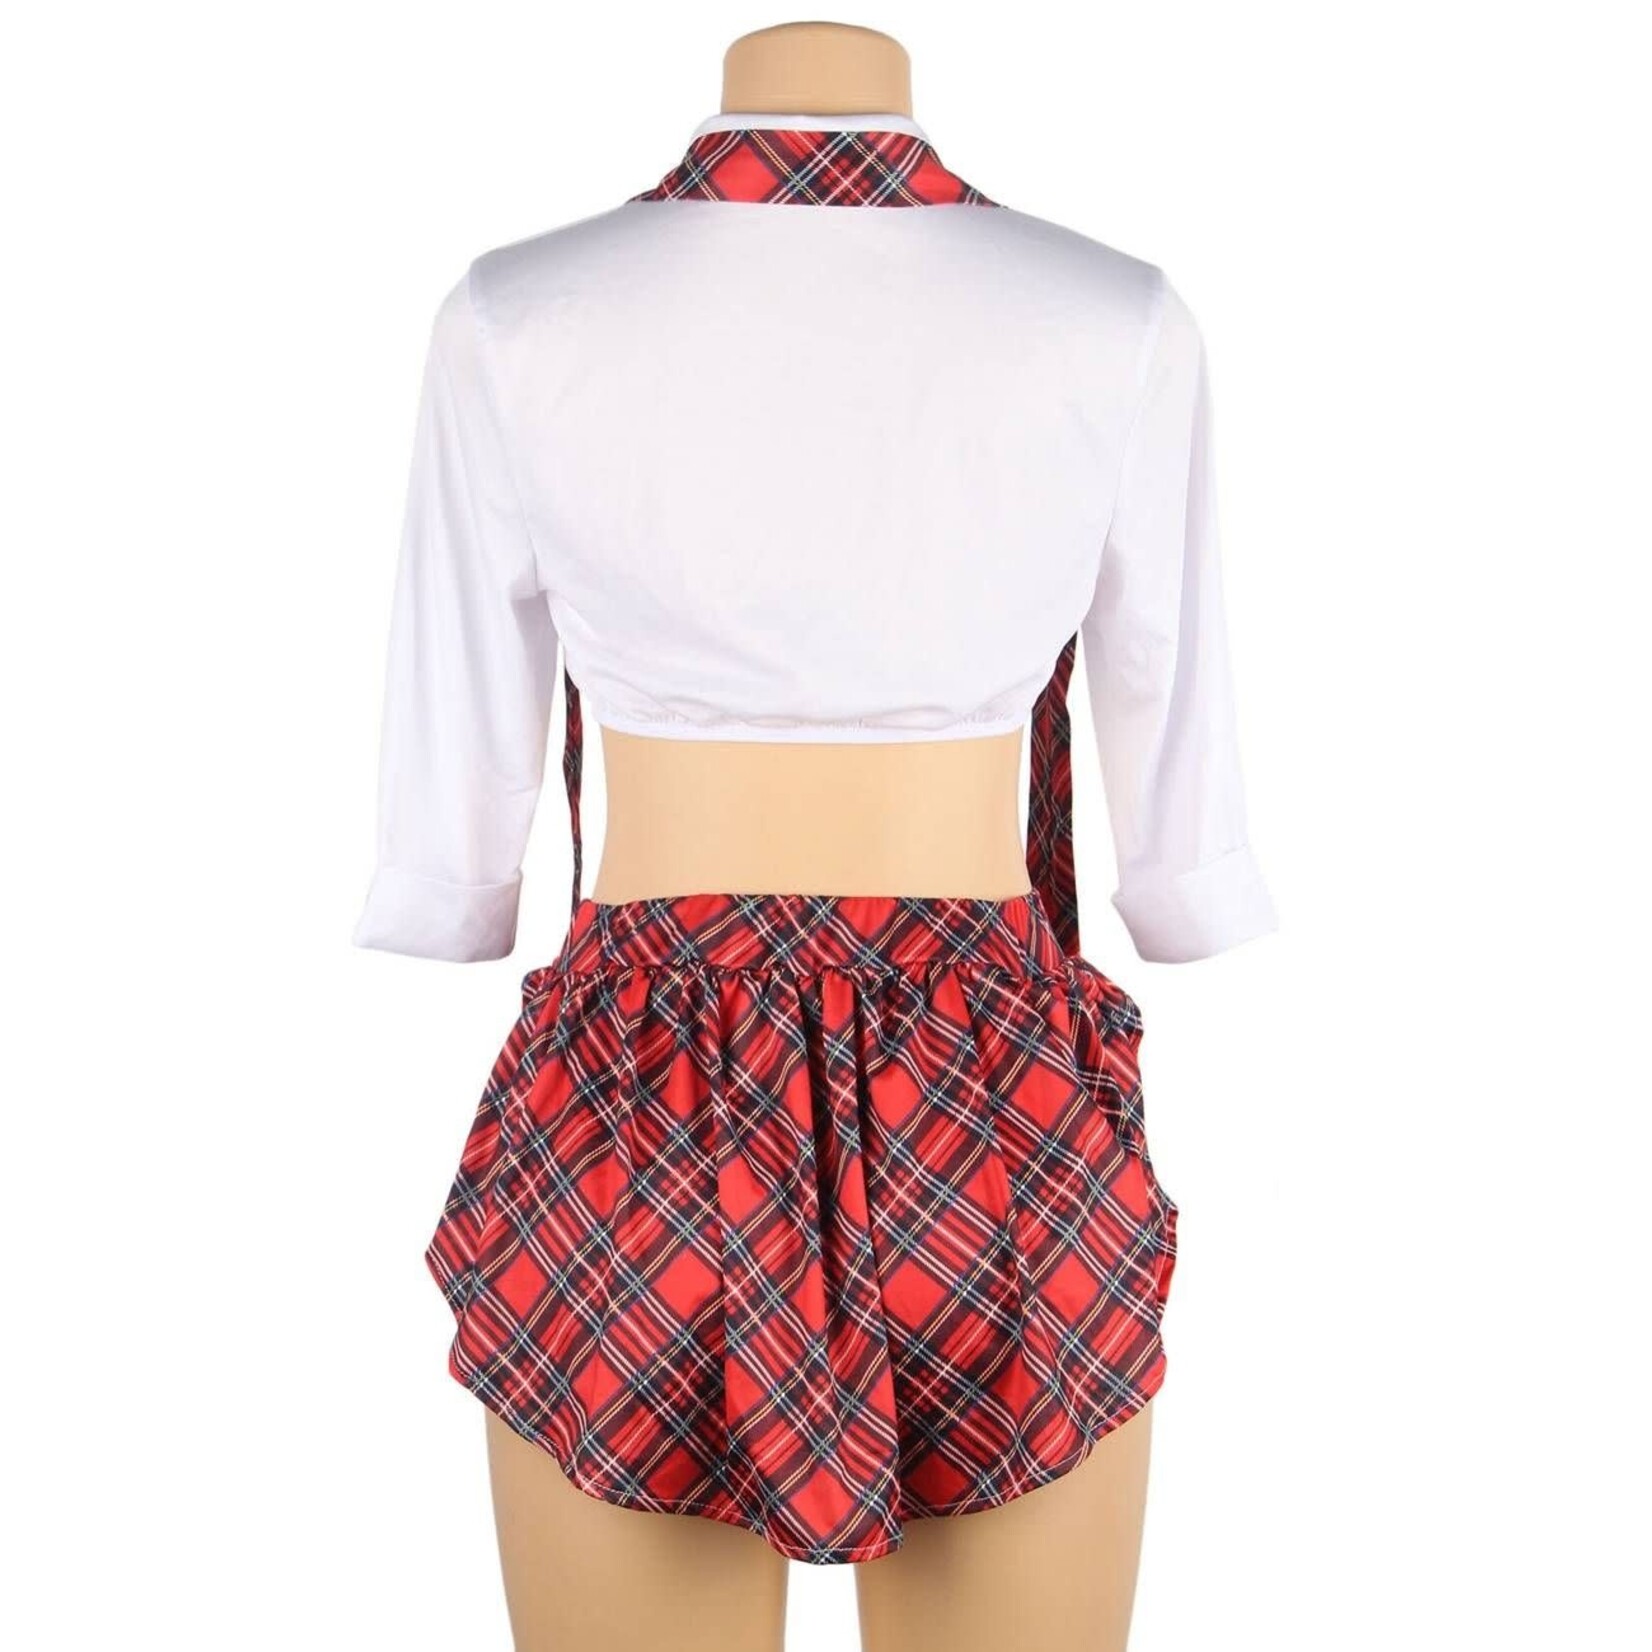 OH YEAH! -  SEXY UNIFORM HIGH-QUALITY STUDENT COLLEGE STYLE COSPLAY SUIT M-L